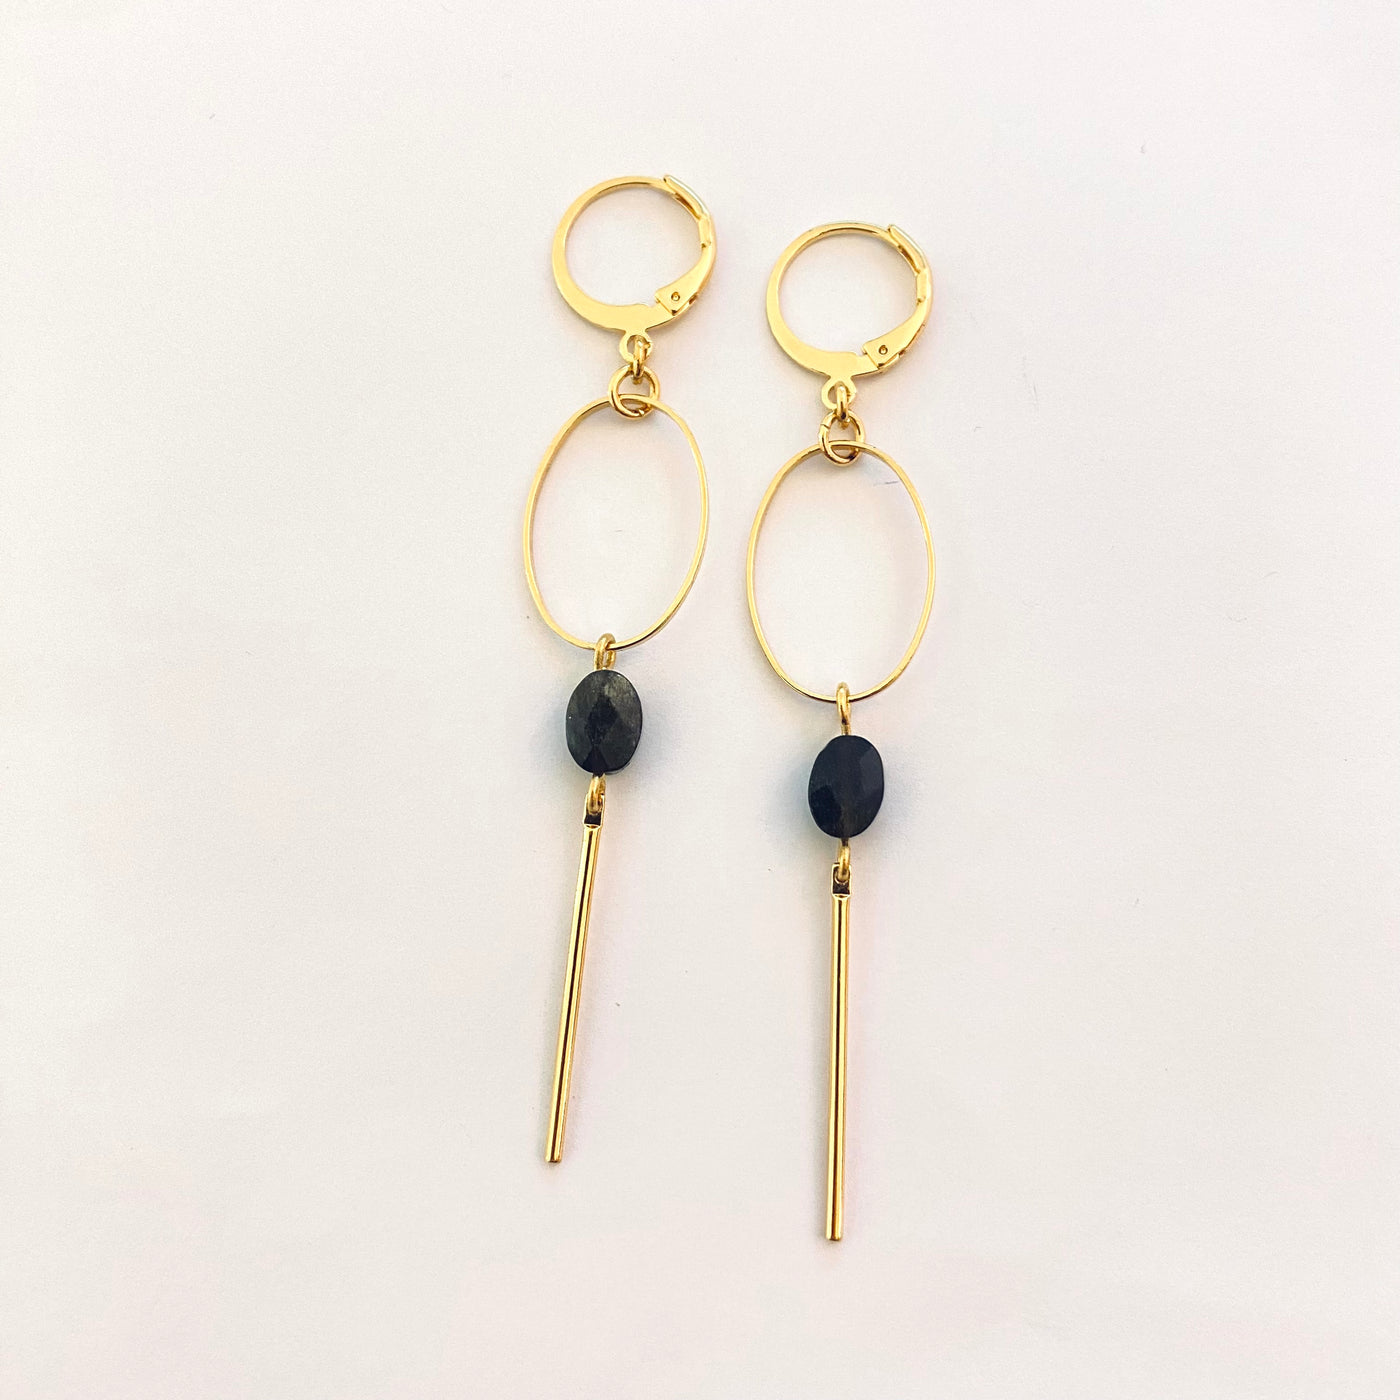 JUSTINE - Black gold plated earrings